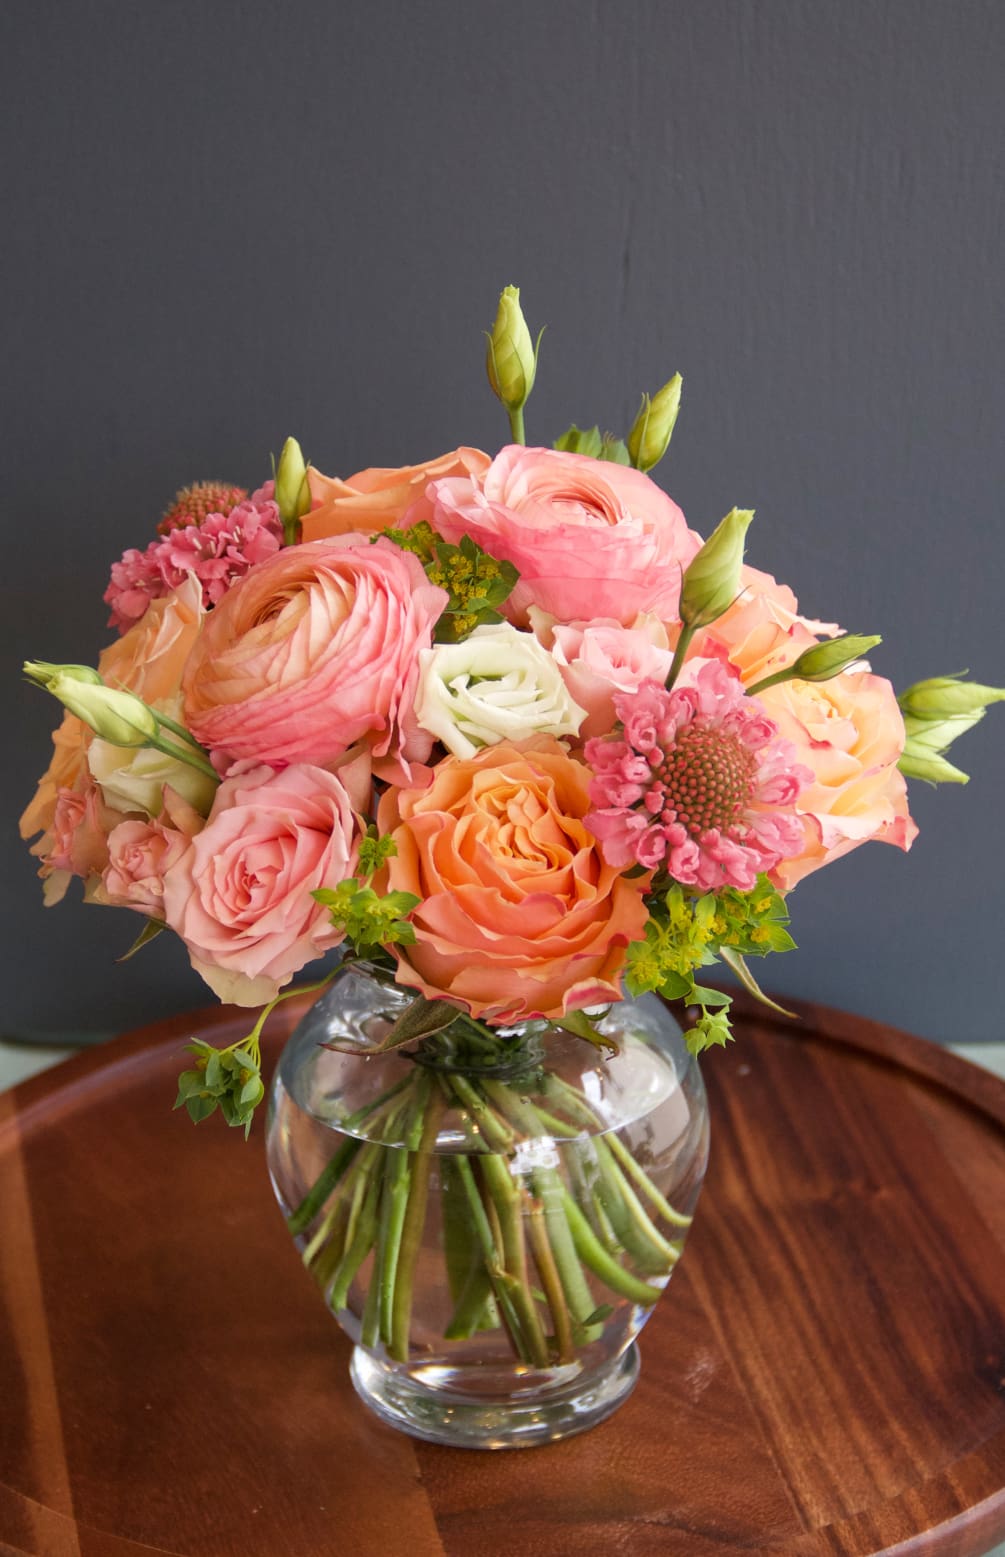 A lovely peach arrangement with a monochromatic peachy pink color scheme. This